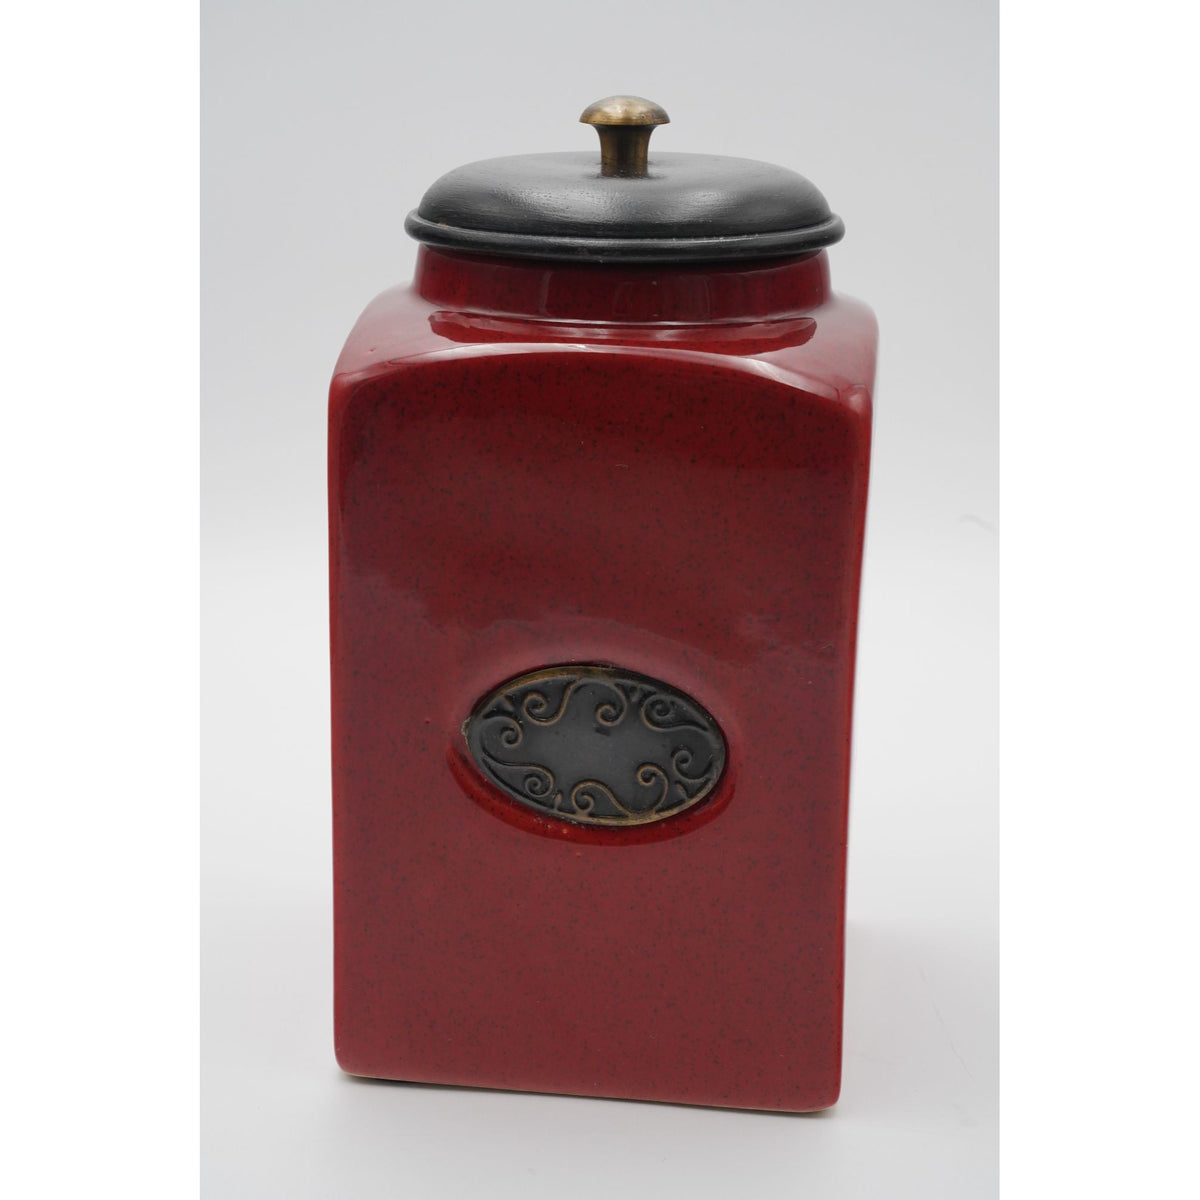 Pier 1 Imports Rustic Brick Red Ceramic Canister with Lid Square 9.75" x 5" x 5"